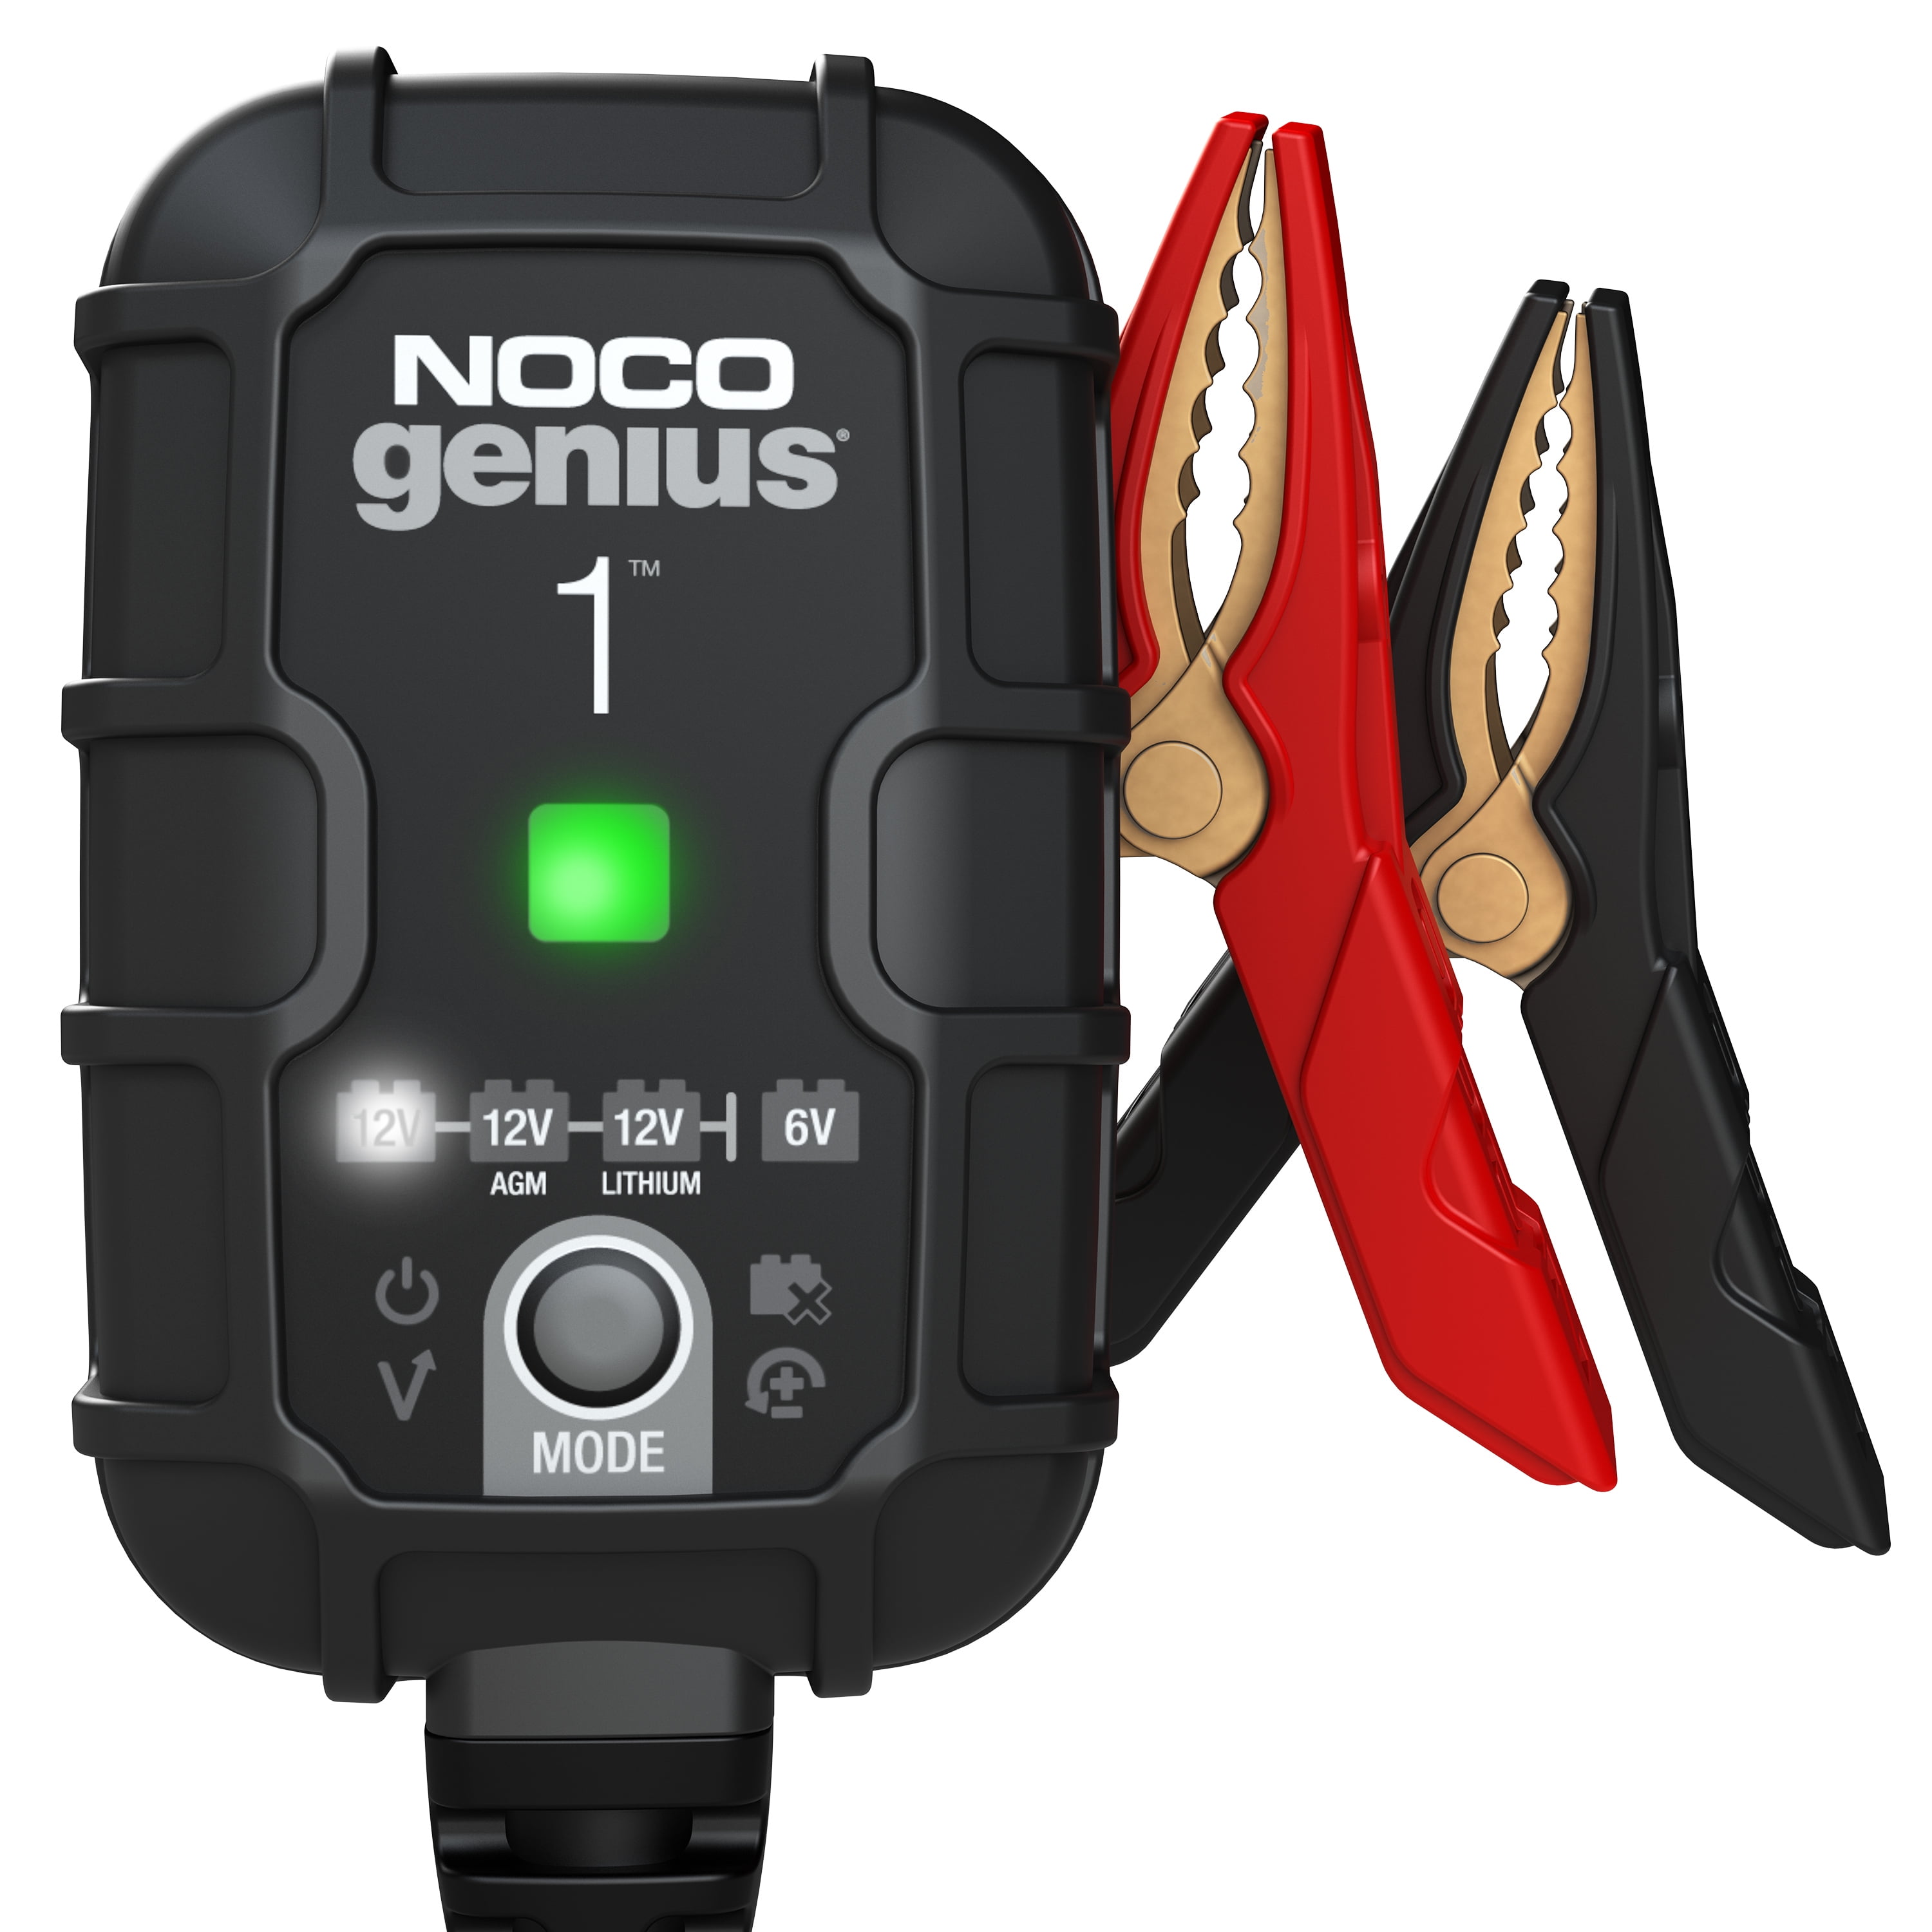 NOCO Genius G750UK 6V/12V ,75A UltraSafe Smart Battery Charger for Cars Motorcycles and More